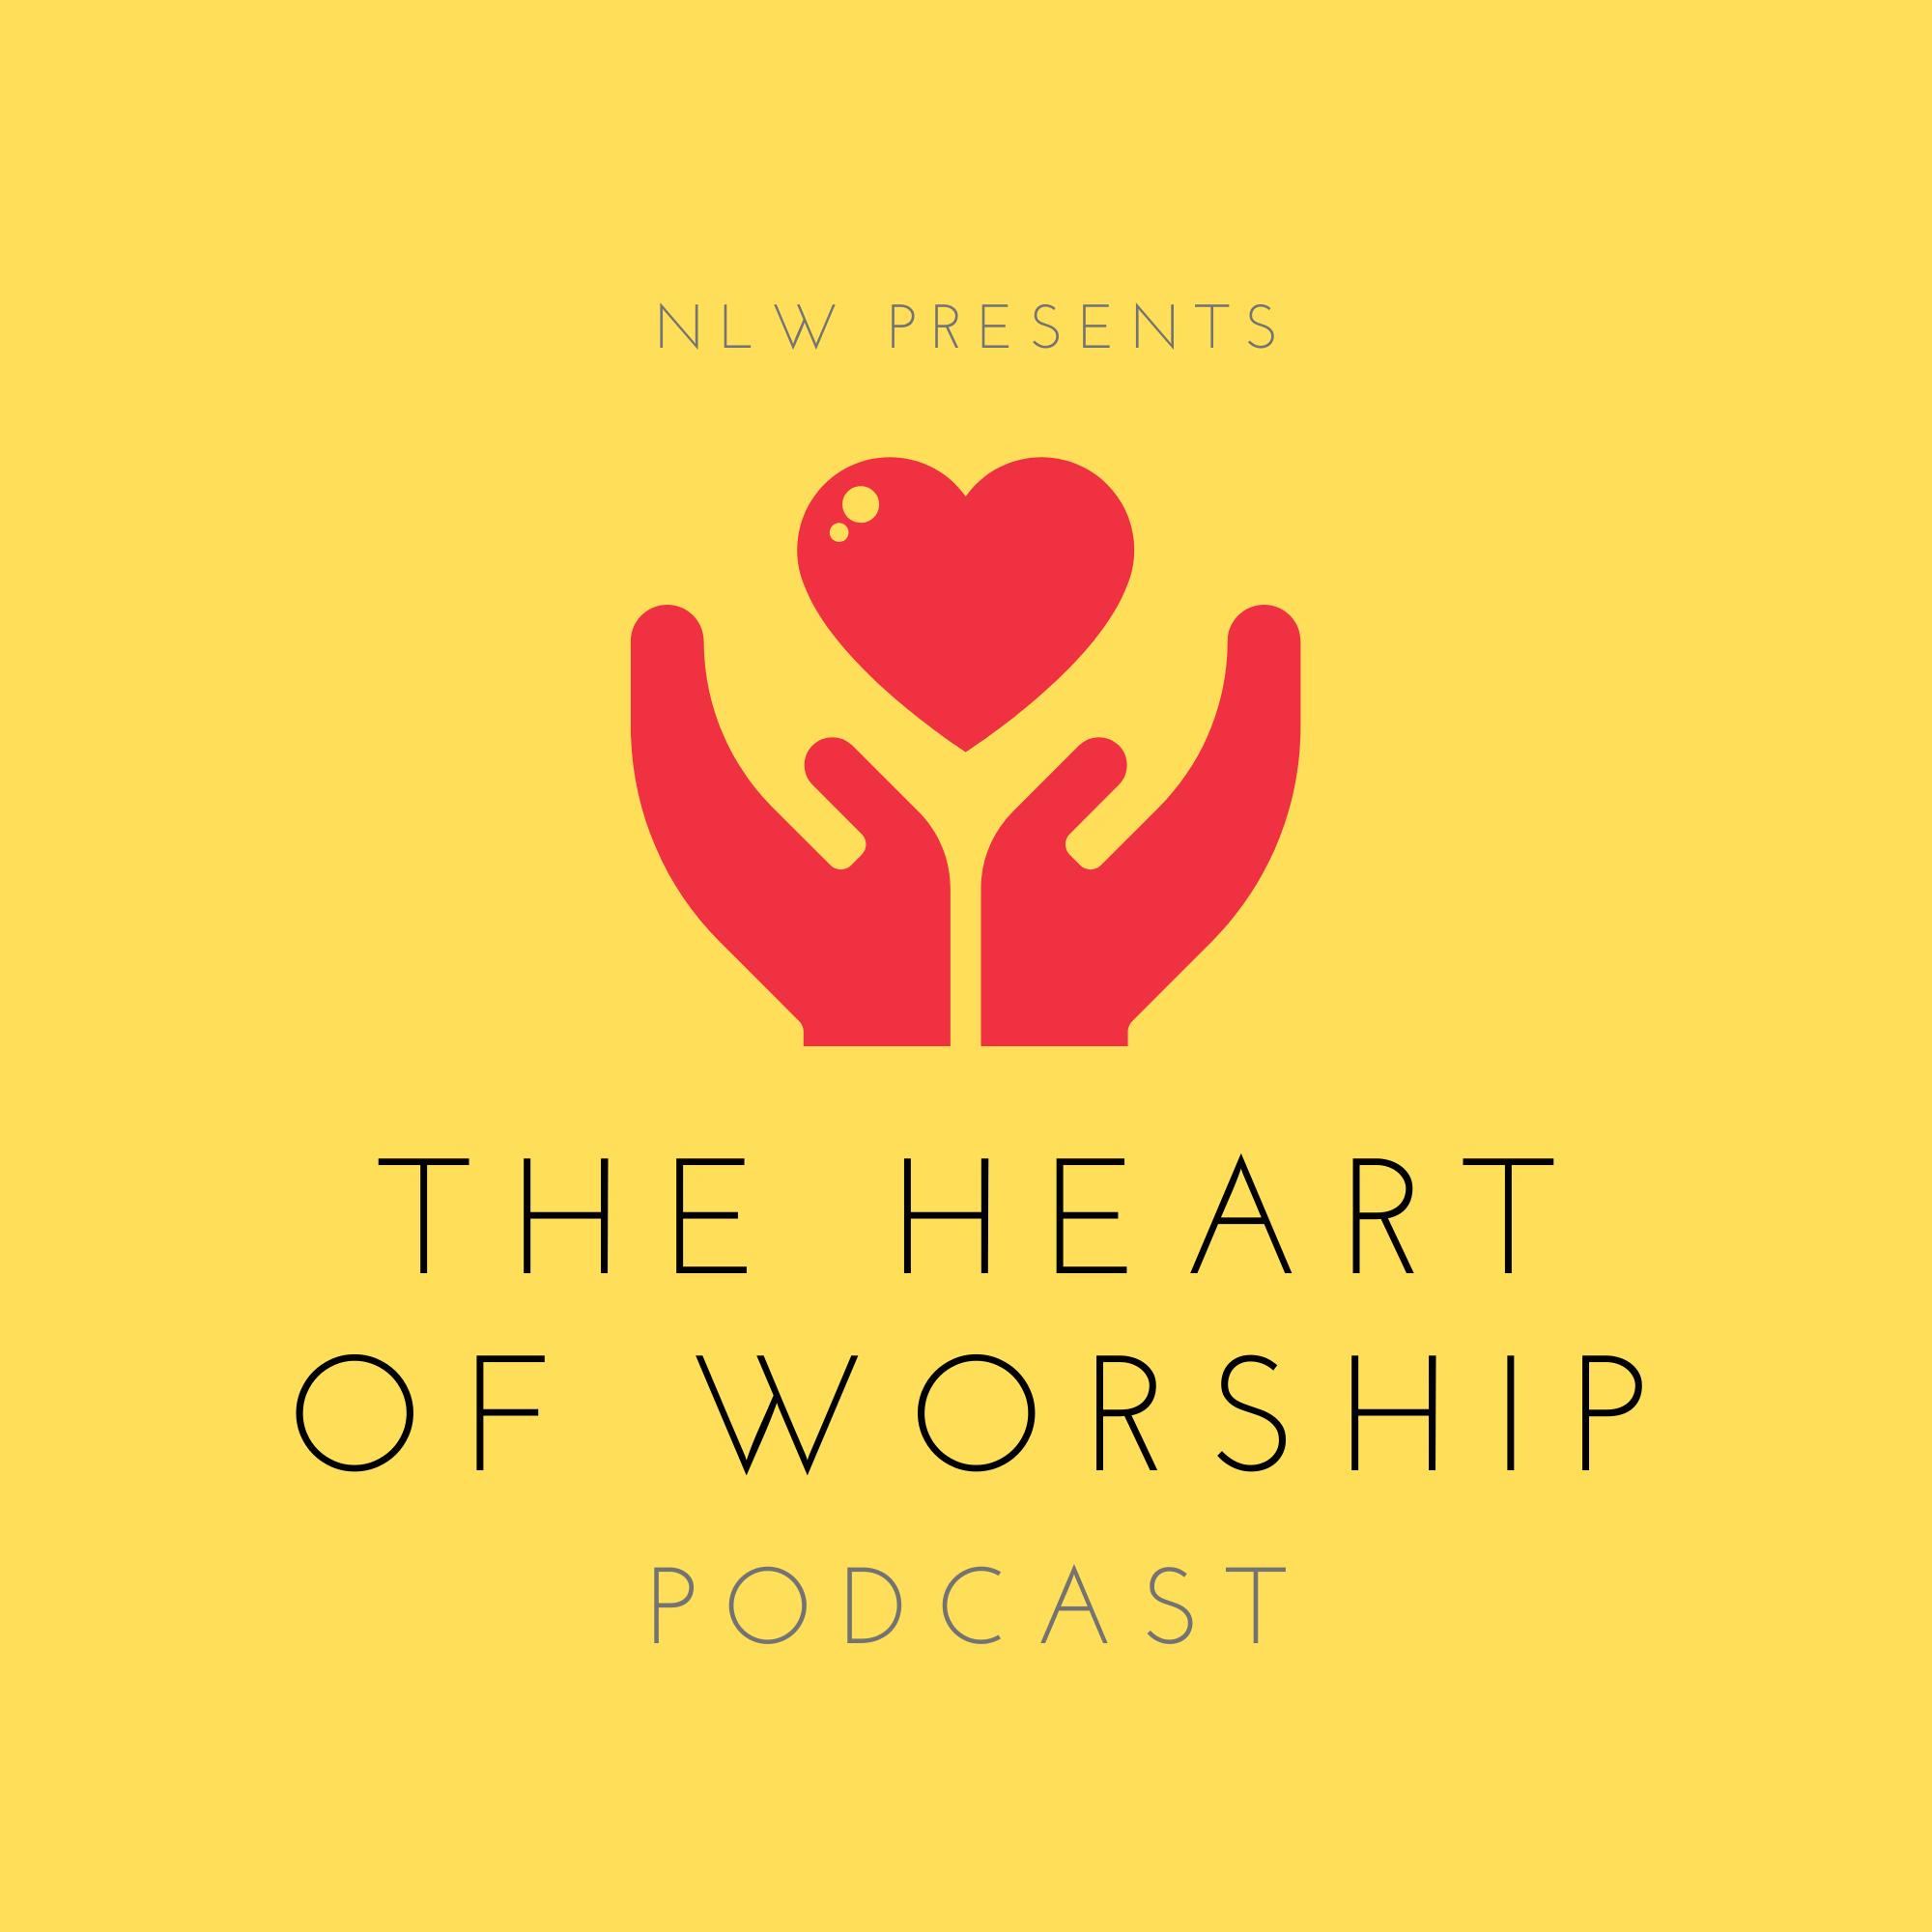 The Heart of Worship Podcast with Dwayne Moore